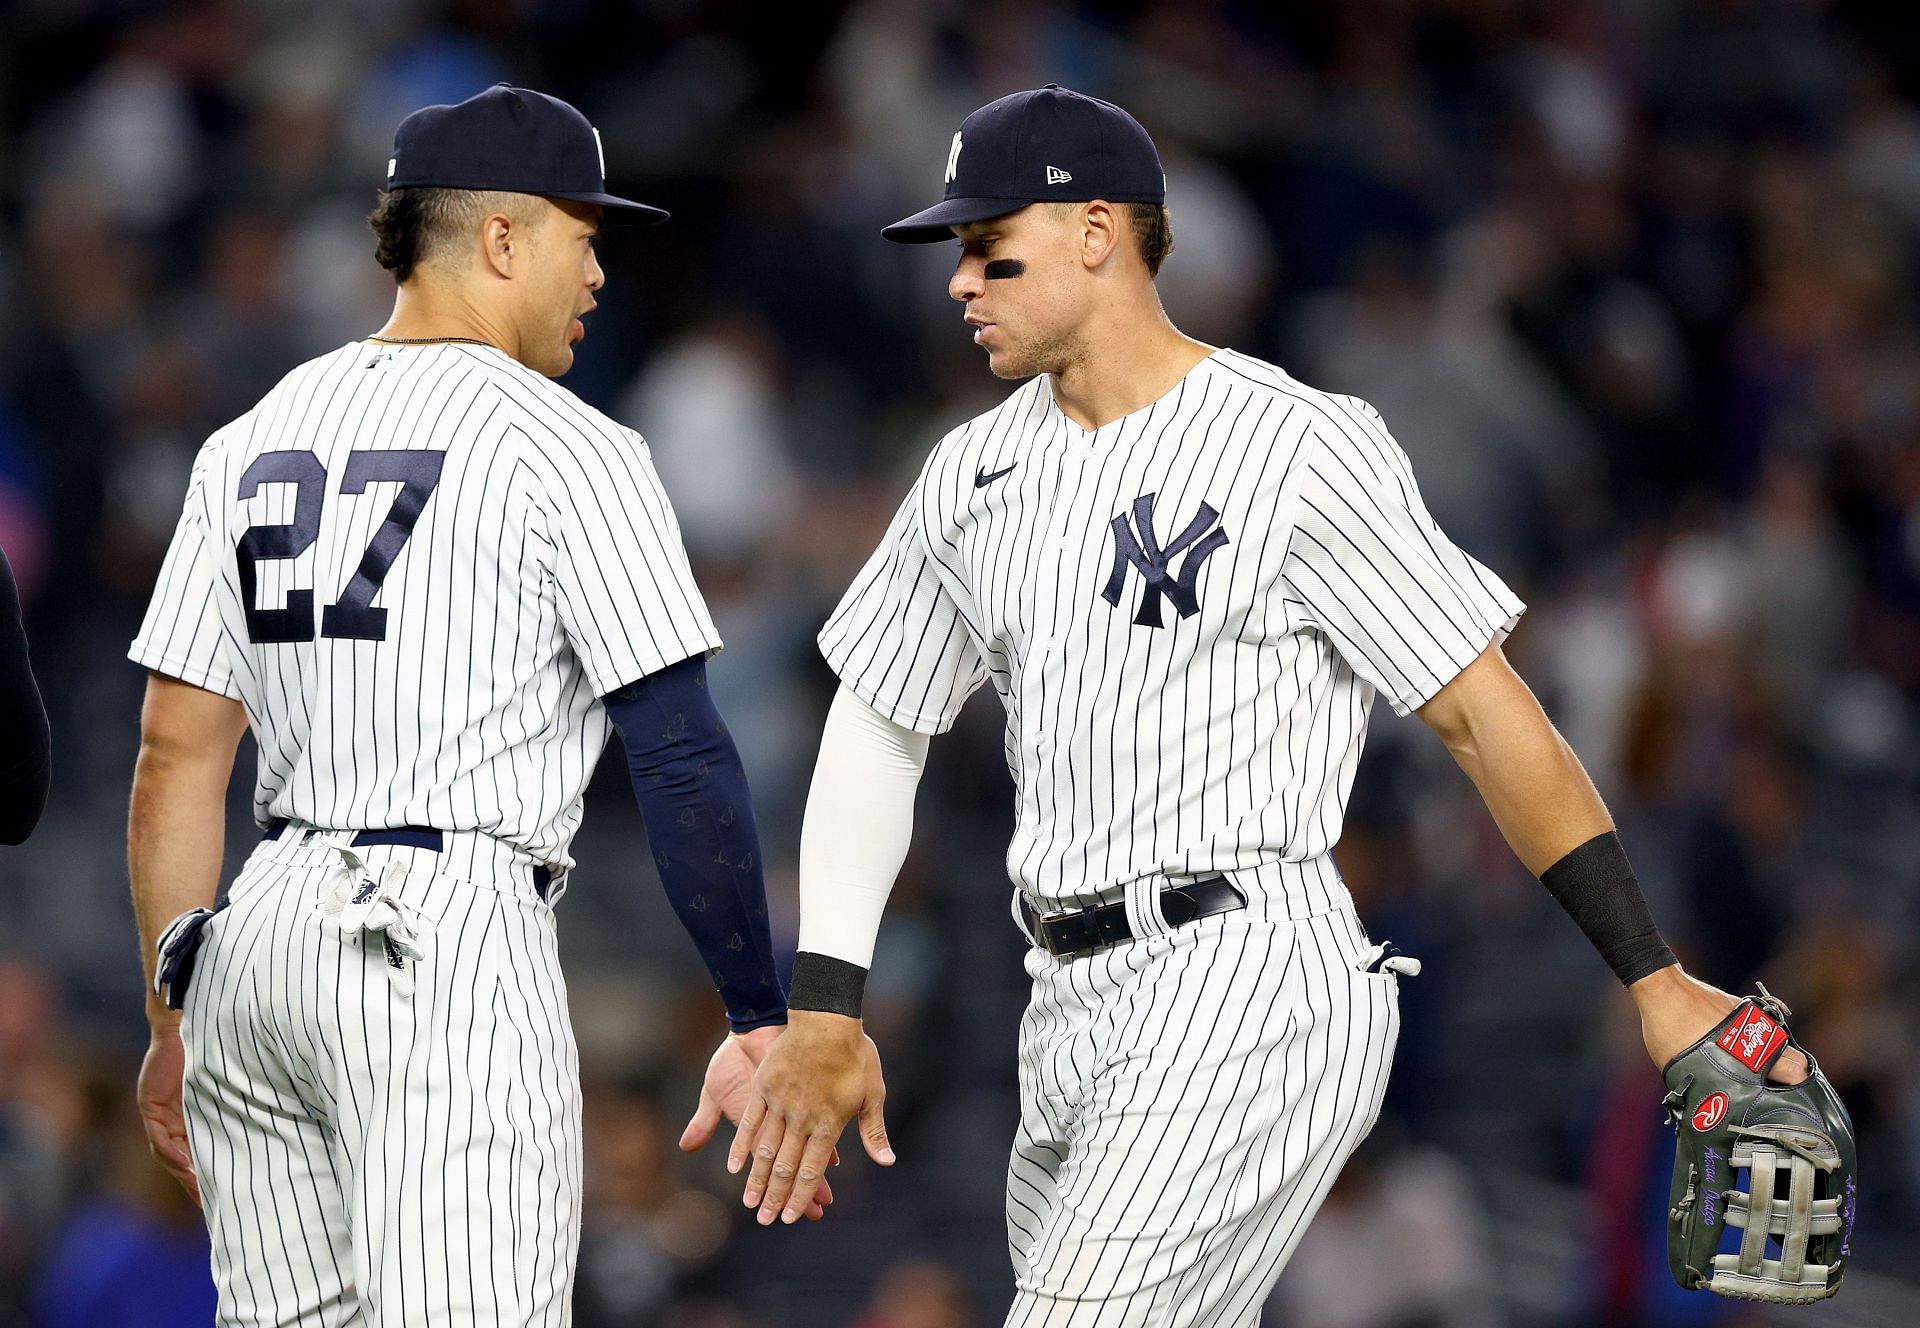 Giancarlo Stanton (left) and Aaron Judge (right) celebrate a win against the Cleveland Guardians at Yankee Stadium.